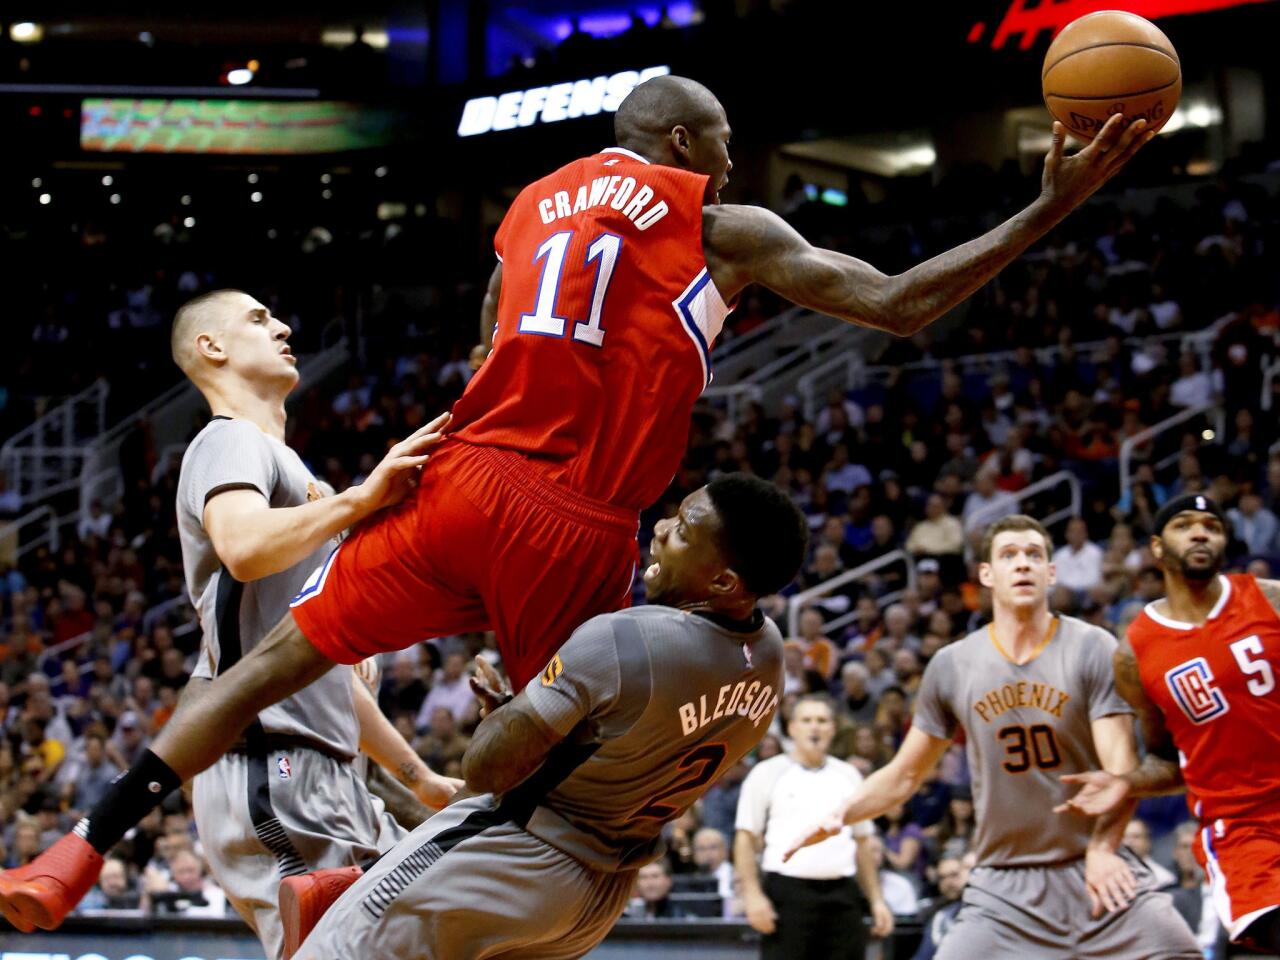 Suns guard Eric Bledsoe draws the offensive foul on Clippers guard Jamal Crawford in the second quarter.